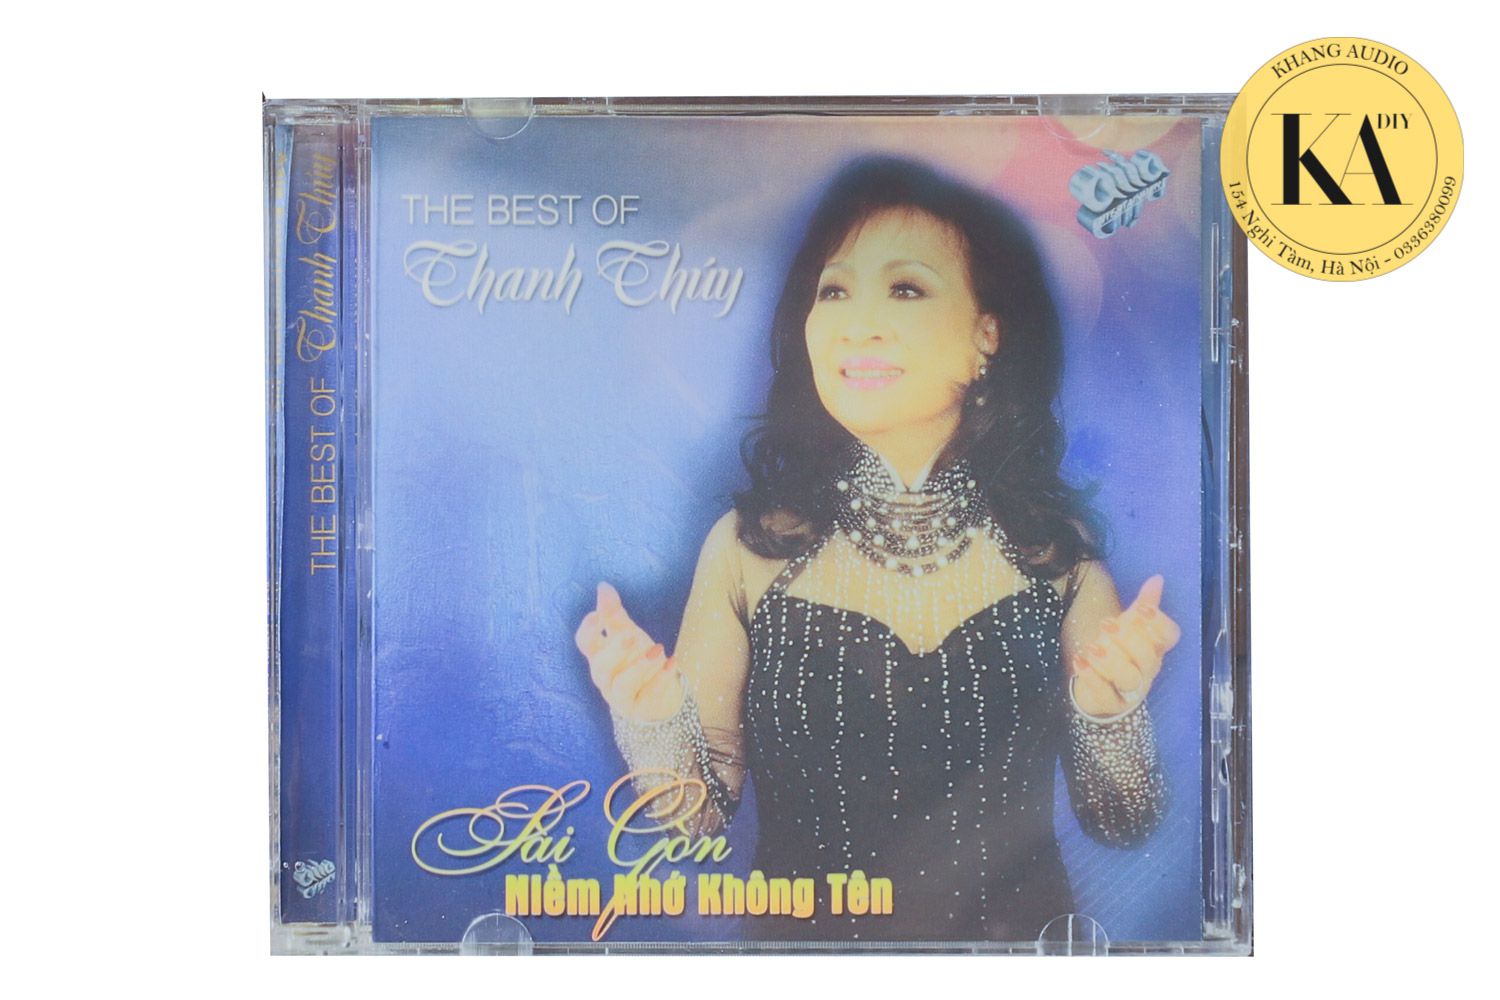 The Best Of Thanh Thúy Khang Audio 0336380099